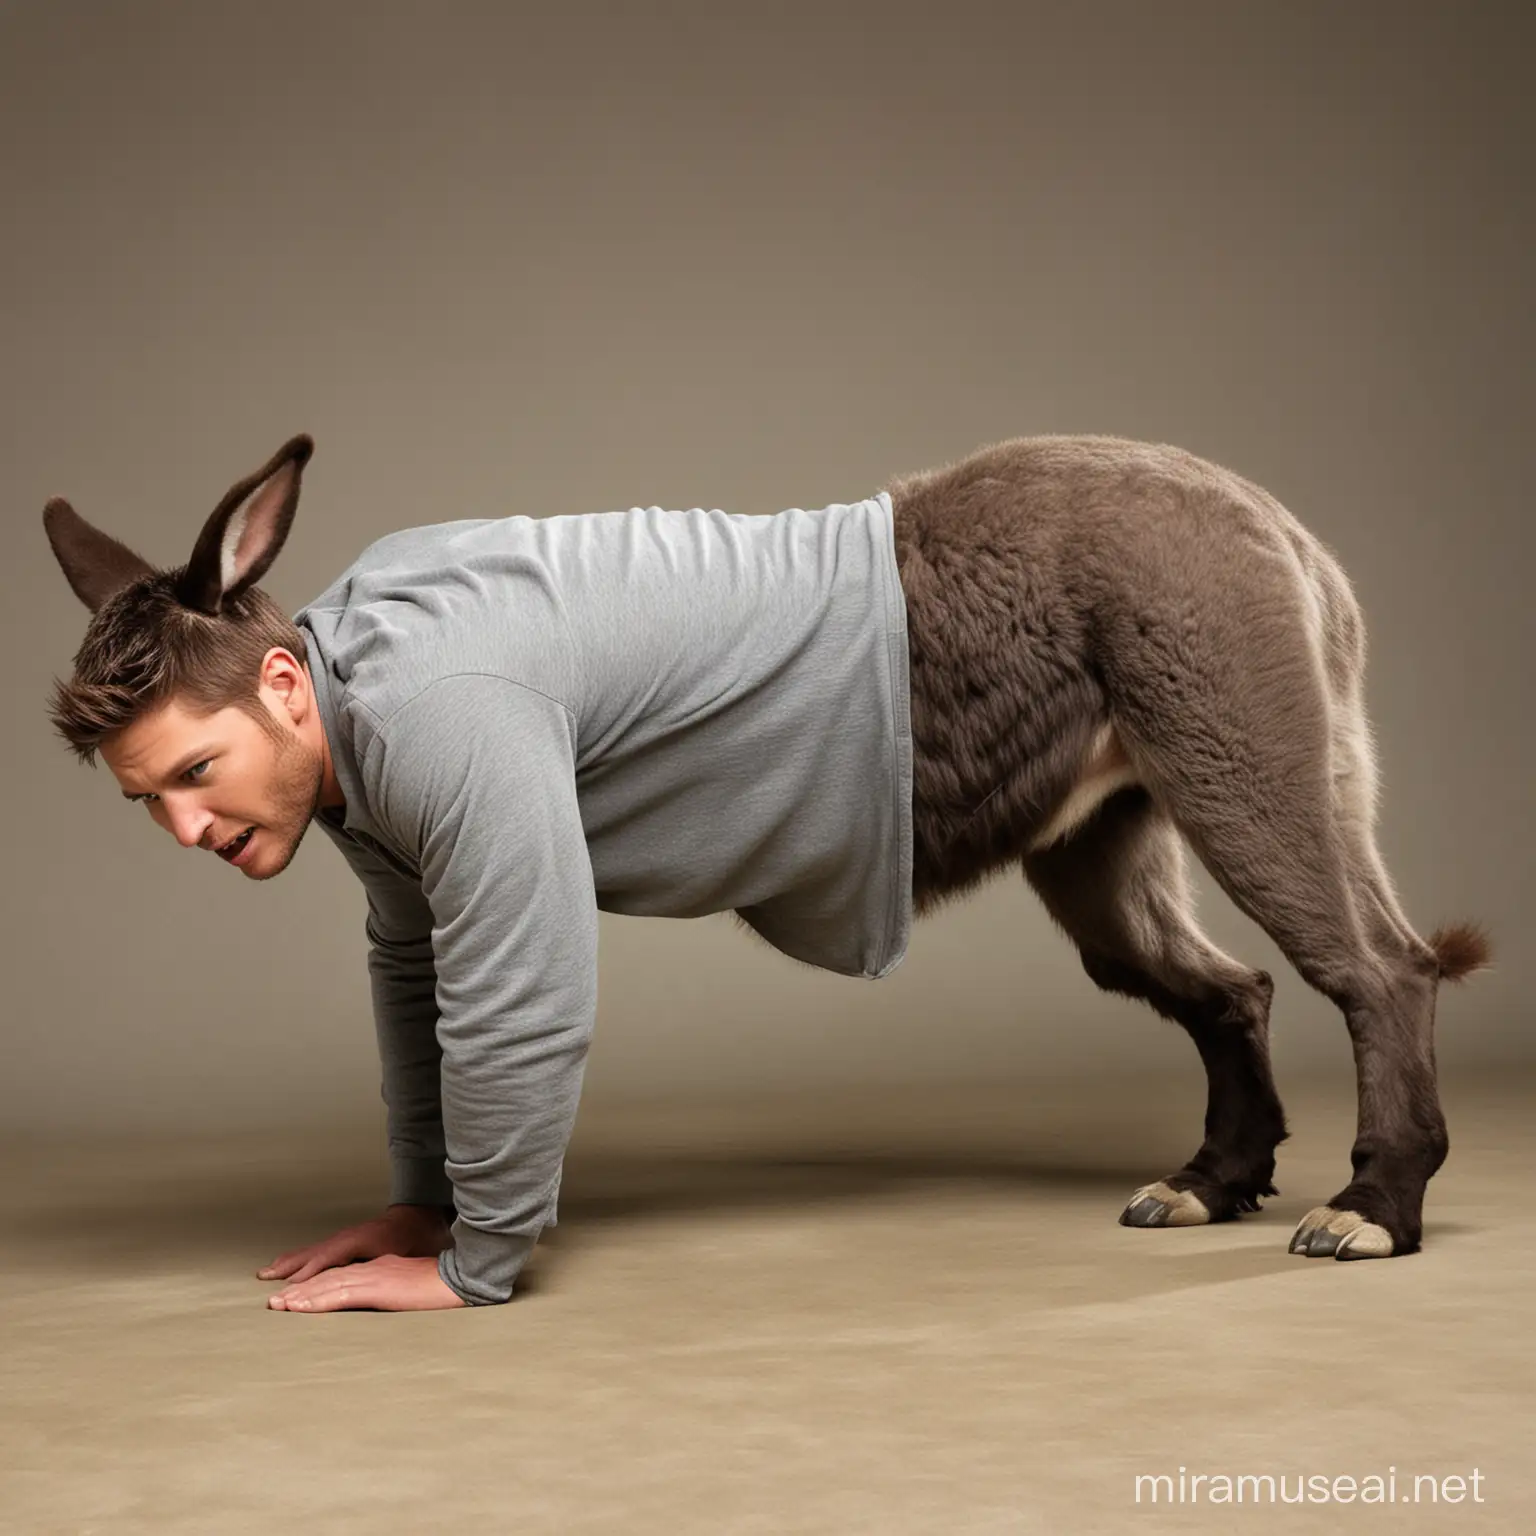 Jensen Ackles on all fours transforming into a donkey. He has donkey ears. He has donkey legs. He has donkey hooves. He has a donkey tail. He has a complete donkey body. And he's braying like a donkey. But his head is human.